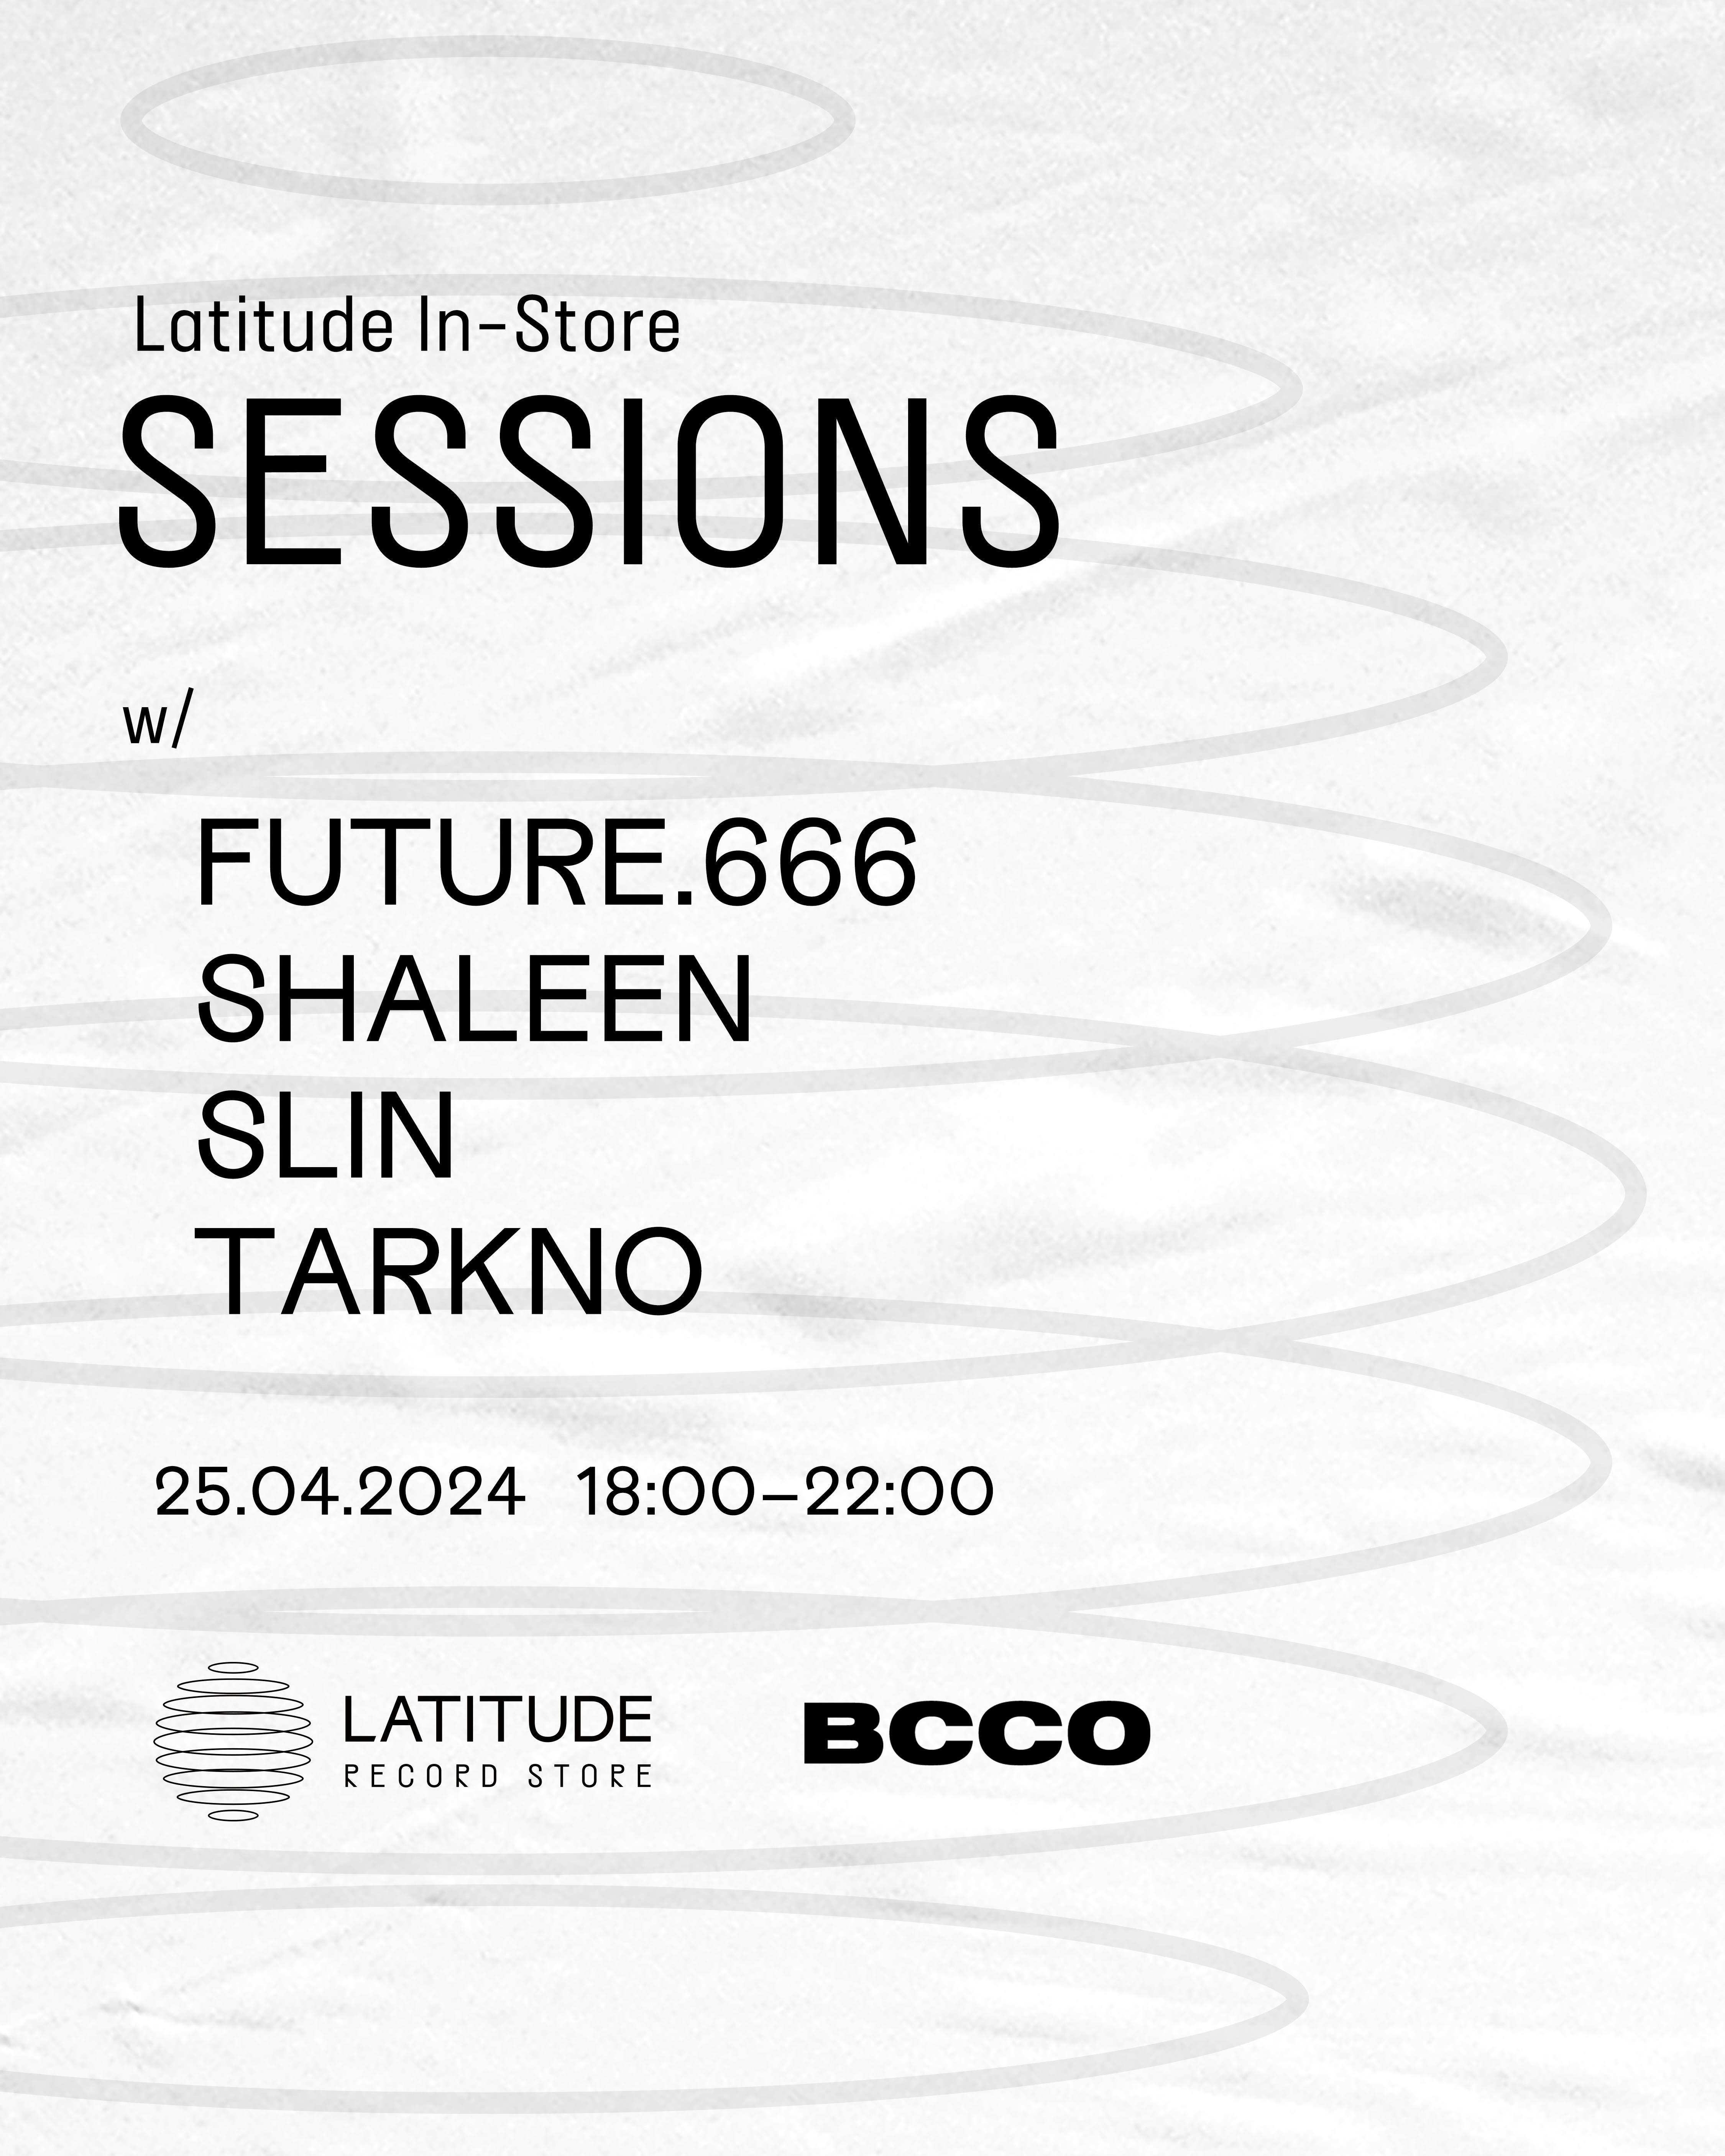 Latitude In-Store Sessions with BCCO - Página frontal